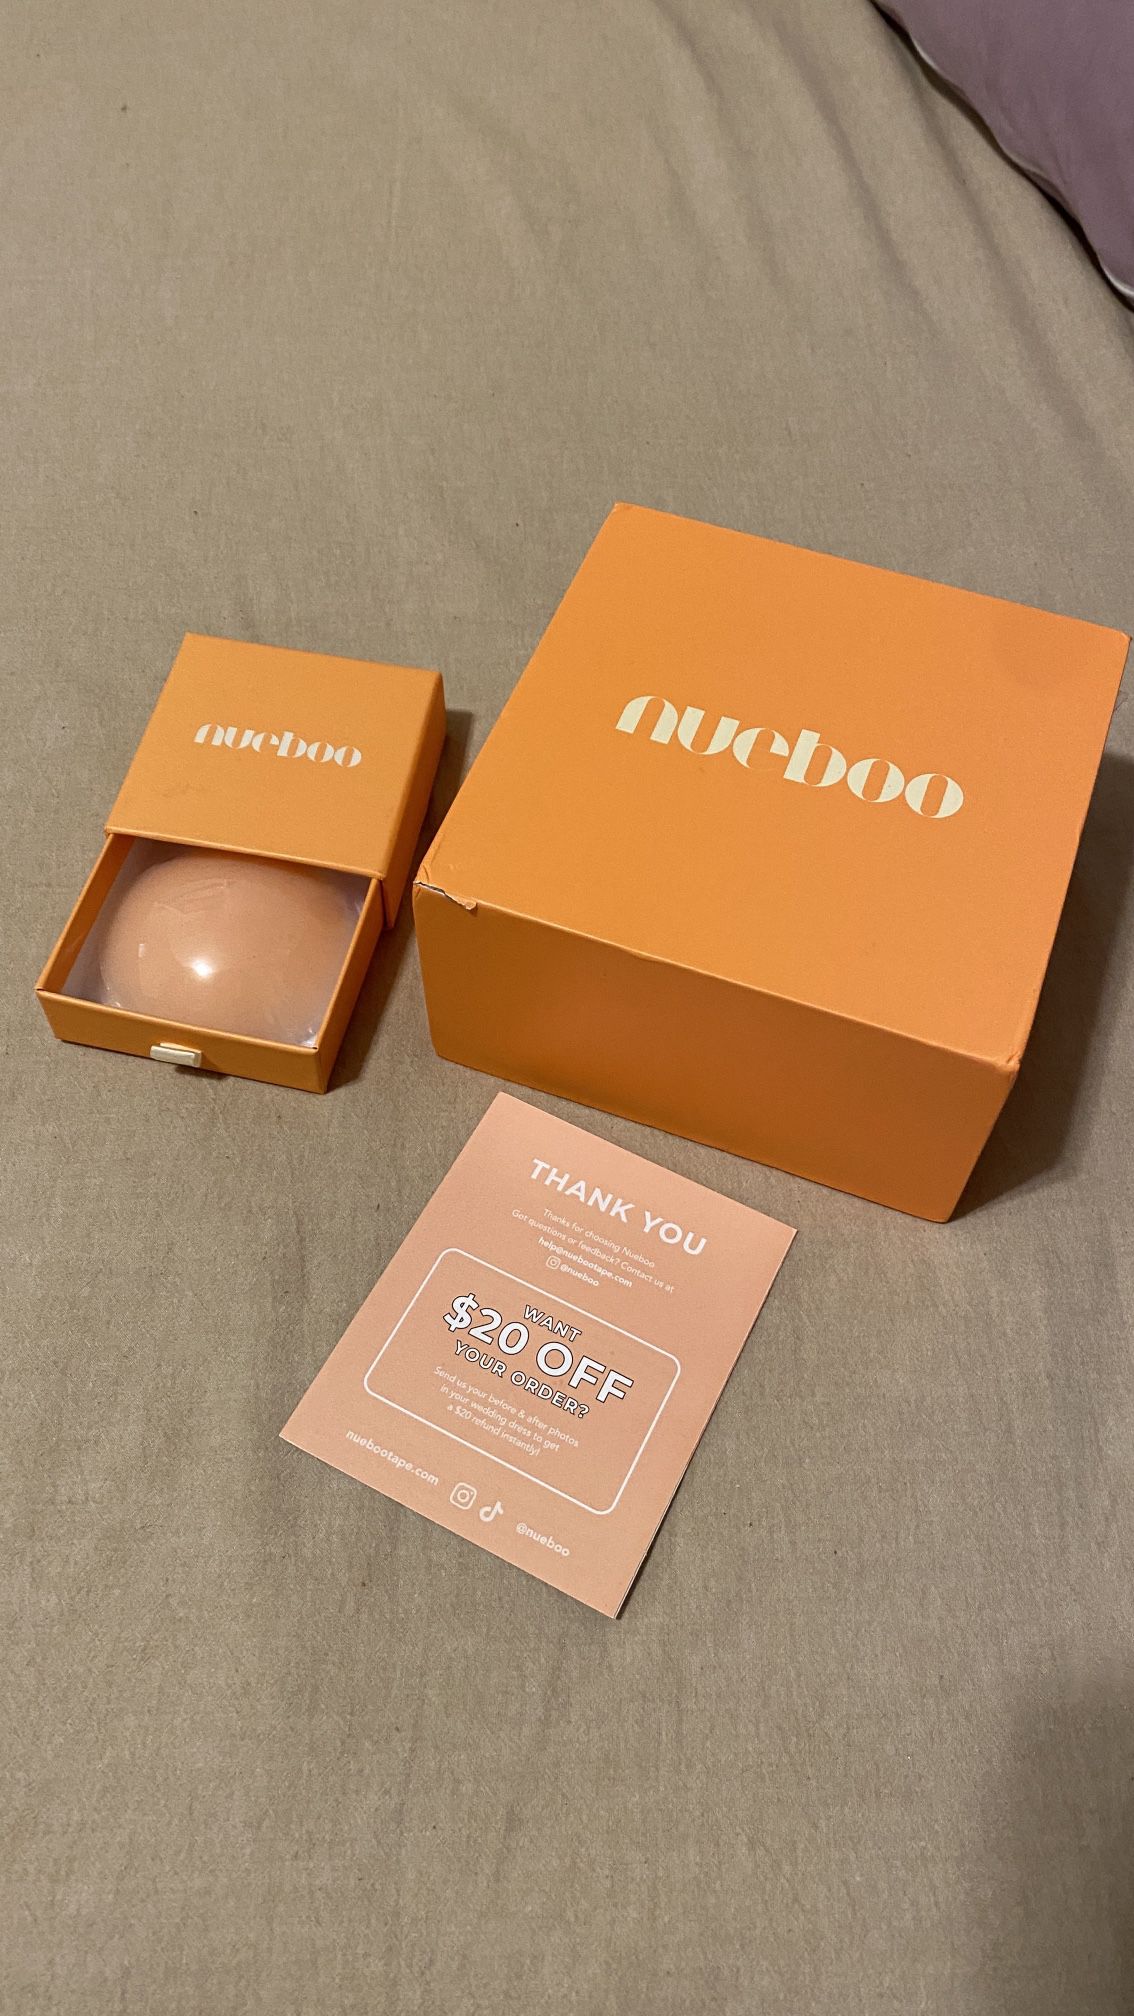 Nueboo for Sale in Los Angeles, CA - OfferUp